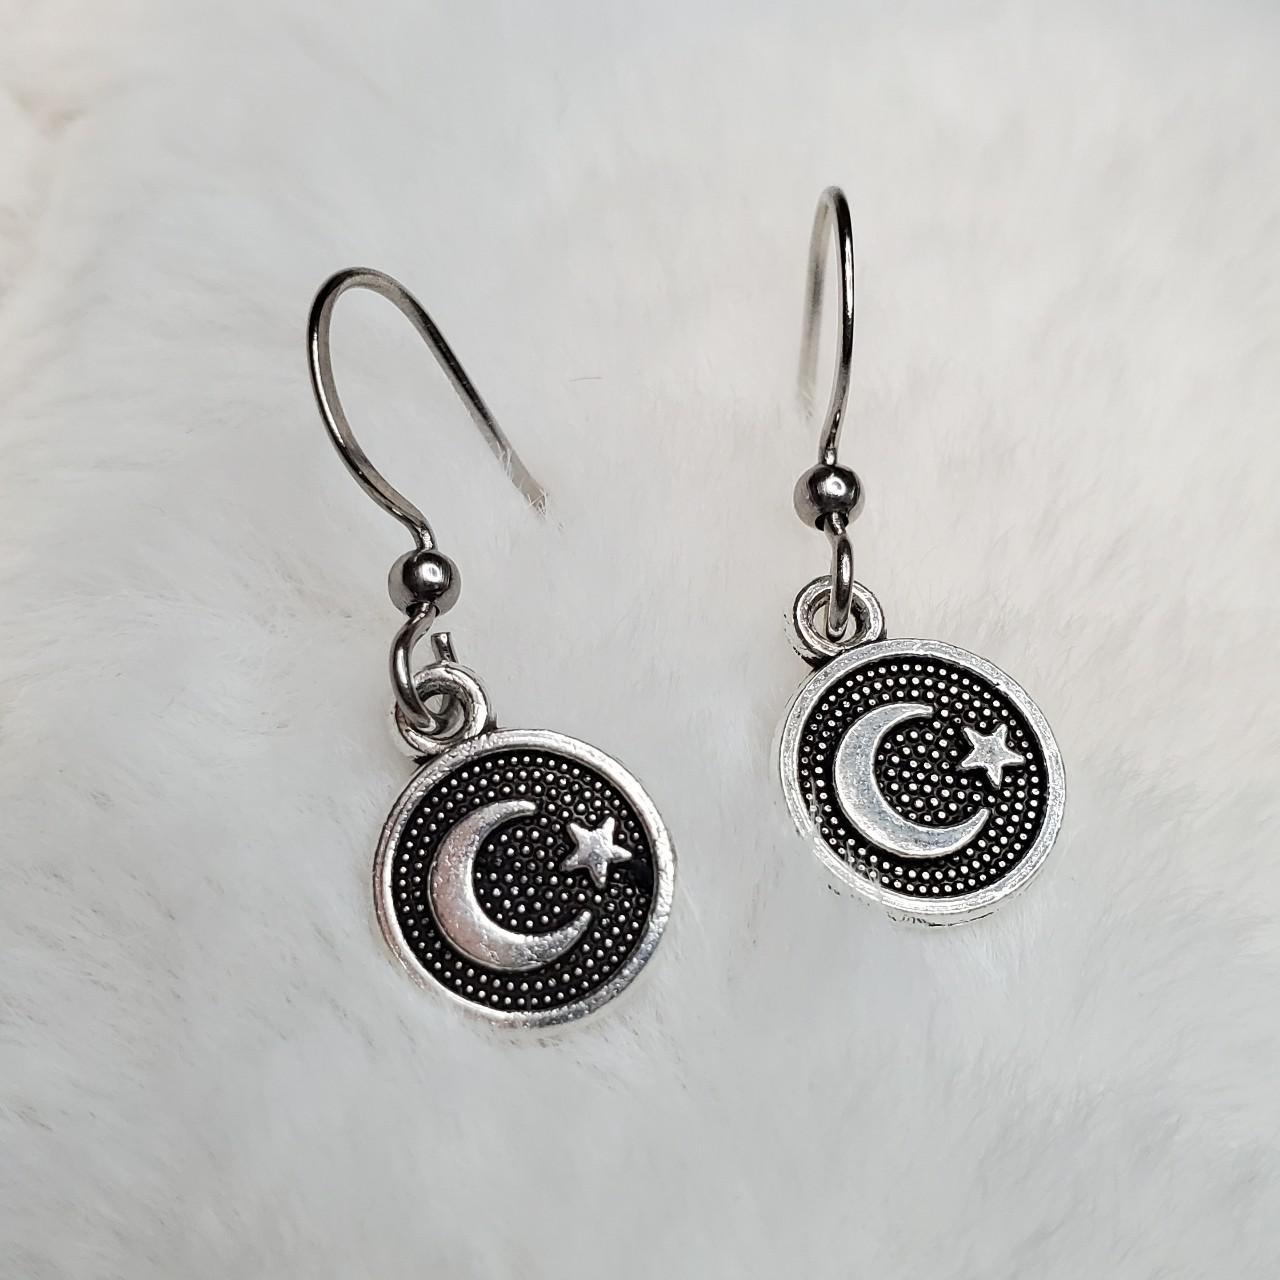 Product Image 1 - Tiny moon and star earrings

These